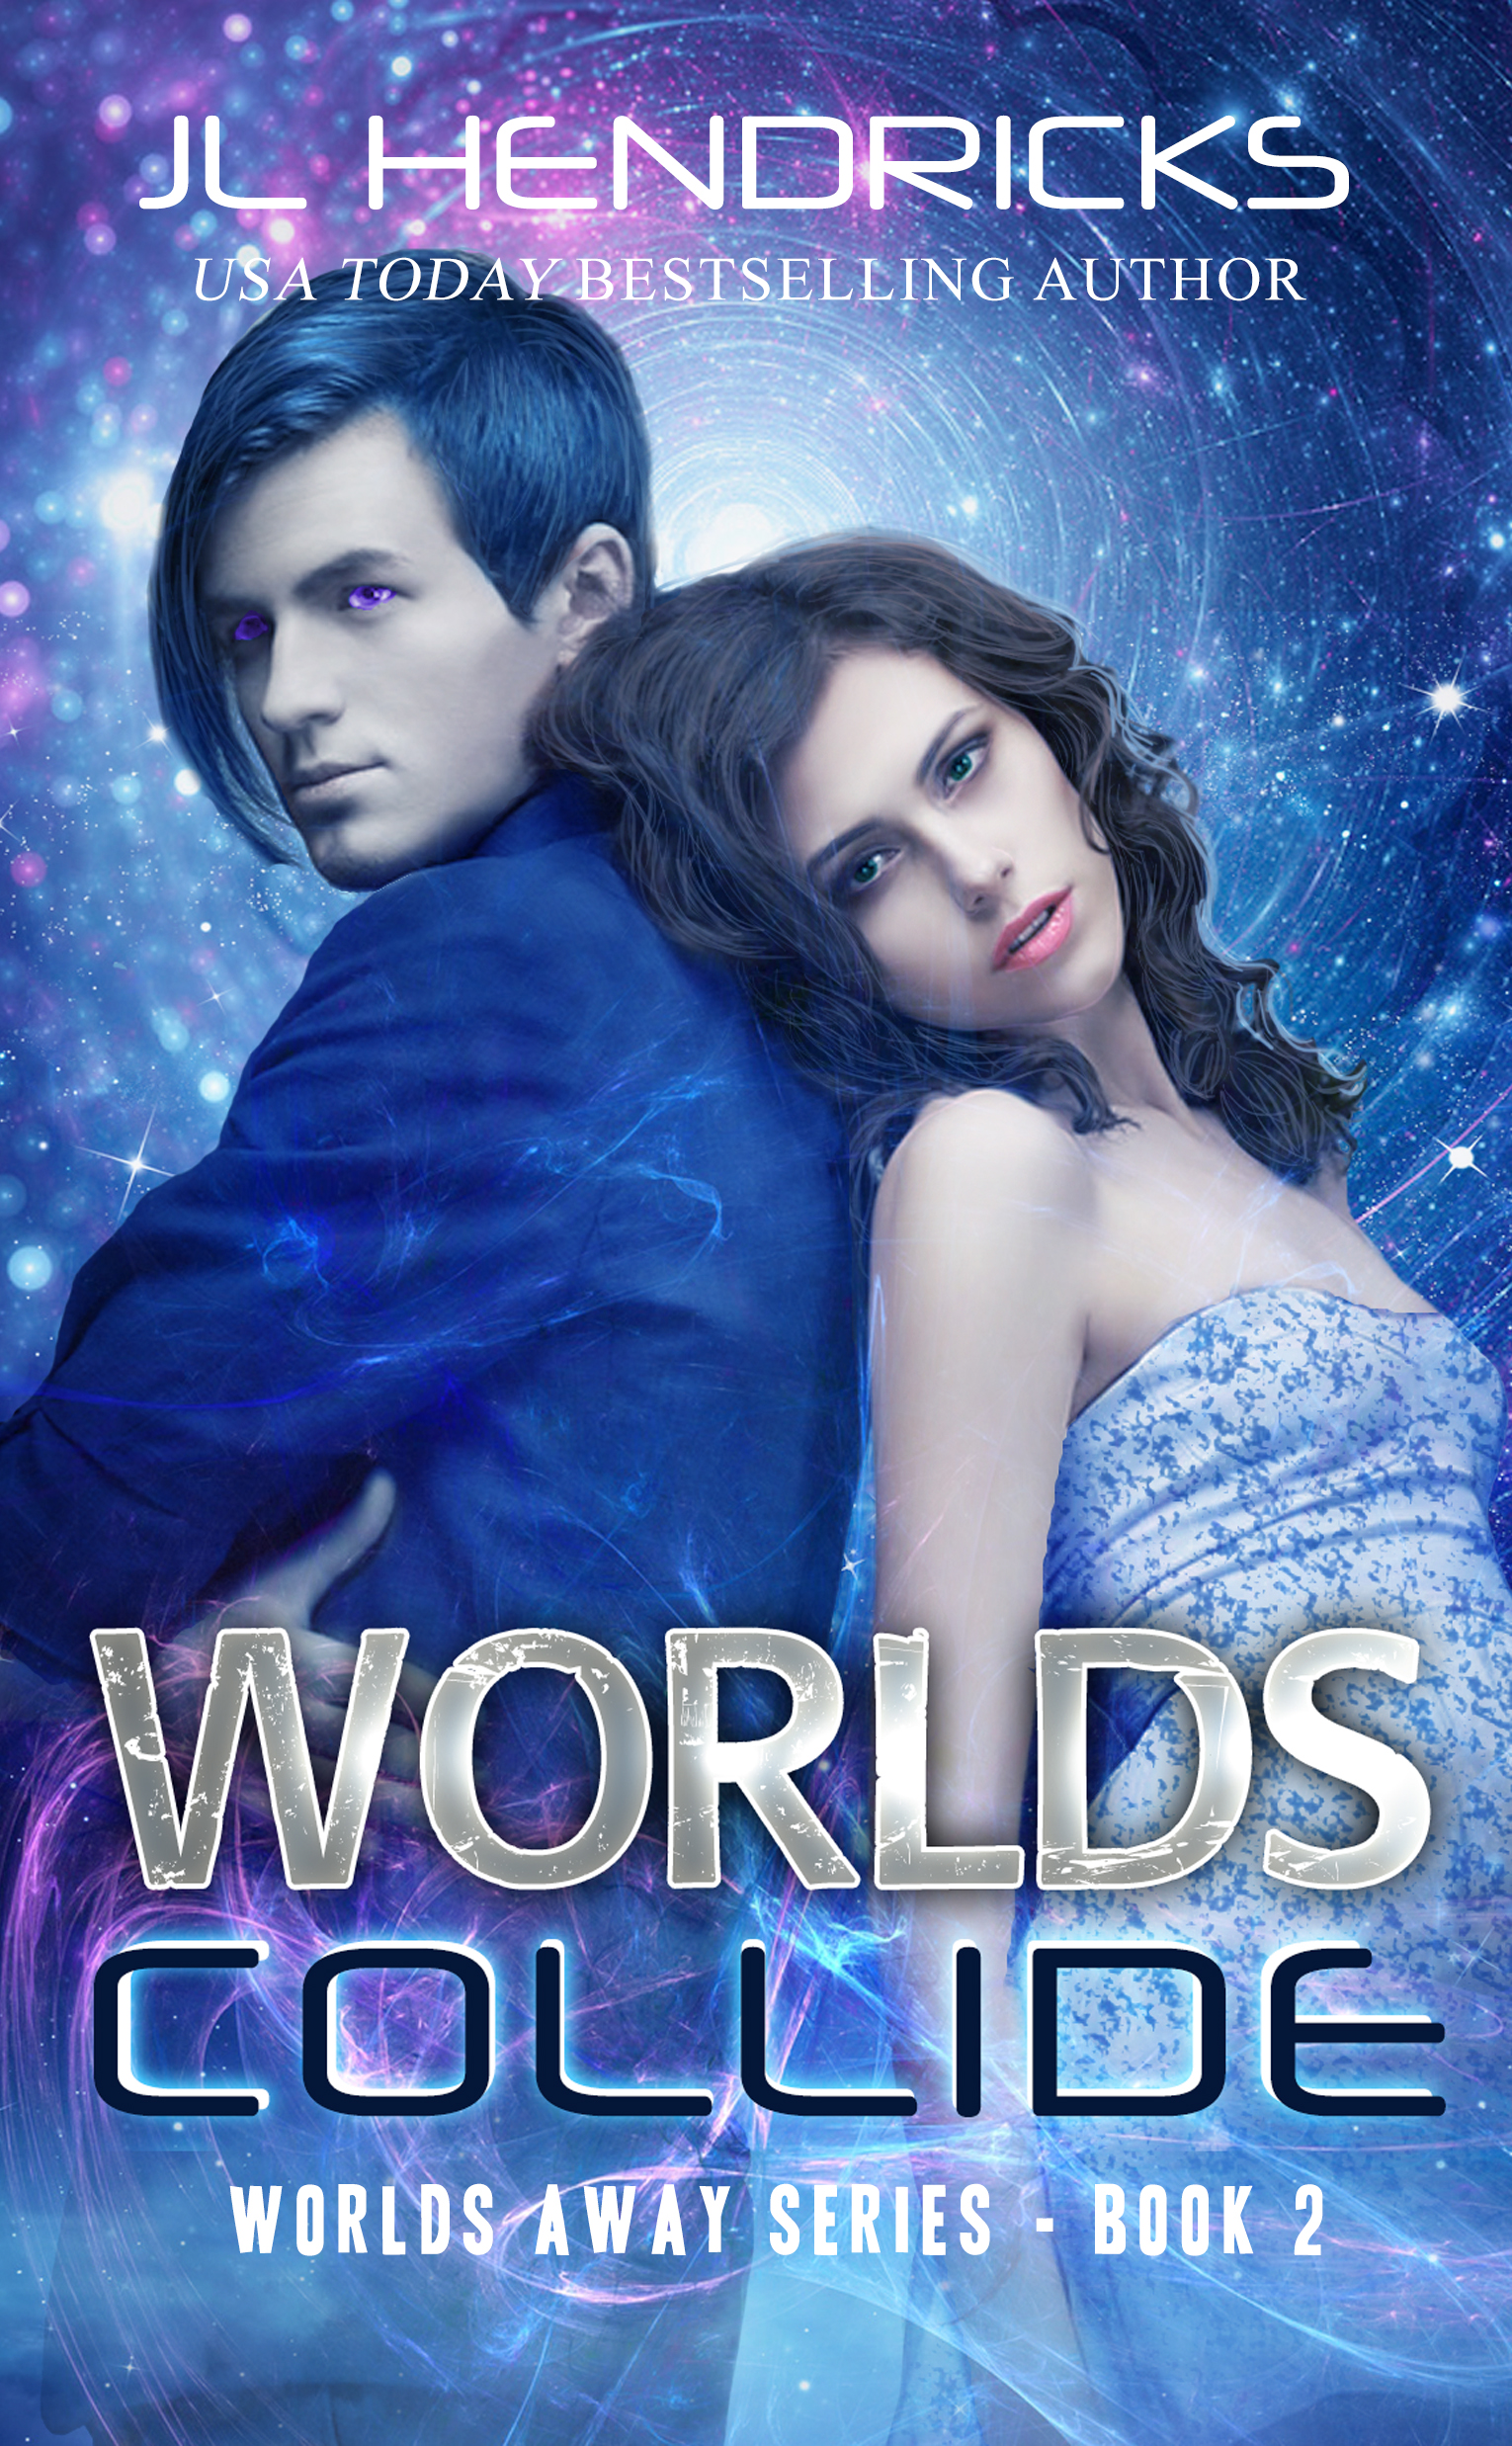 The Worlds Away Series Book 2: Worlds Collide